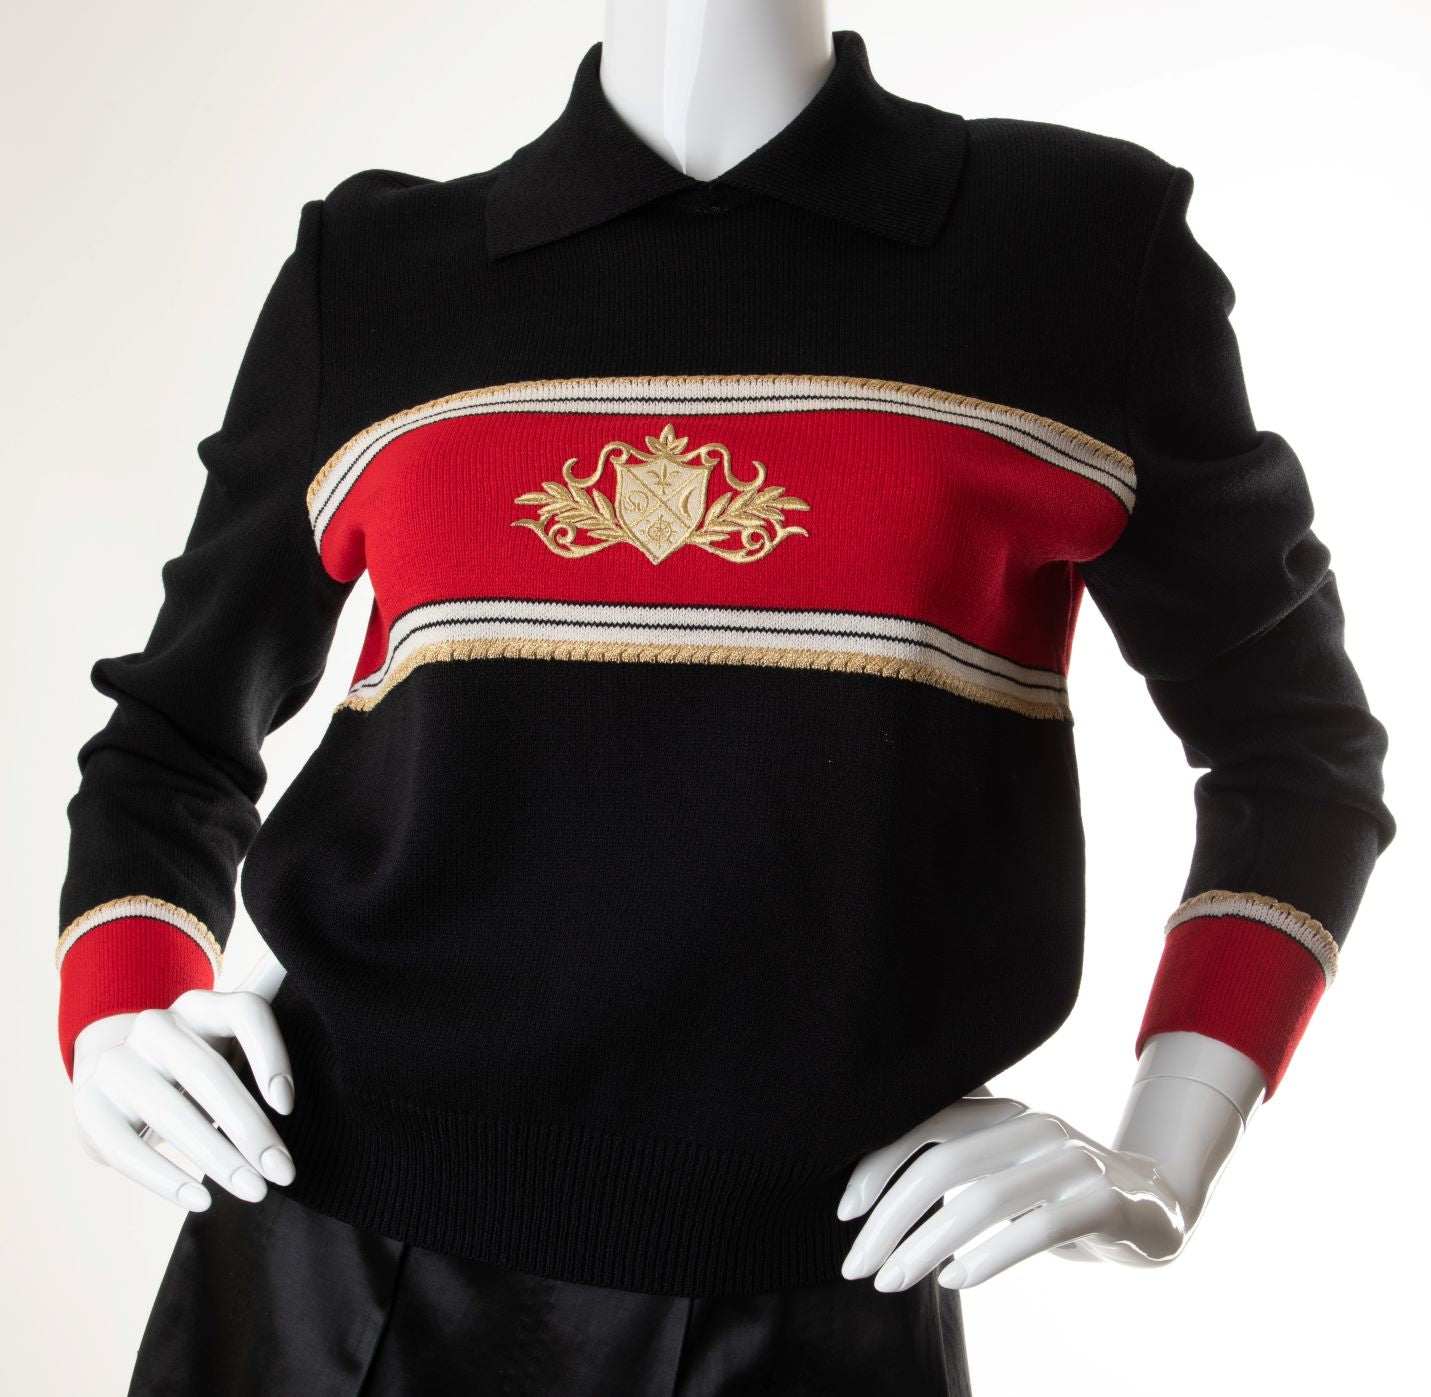 St. John - Santana Knit Top with Embroidered Crest